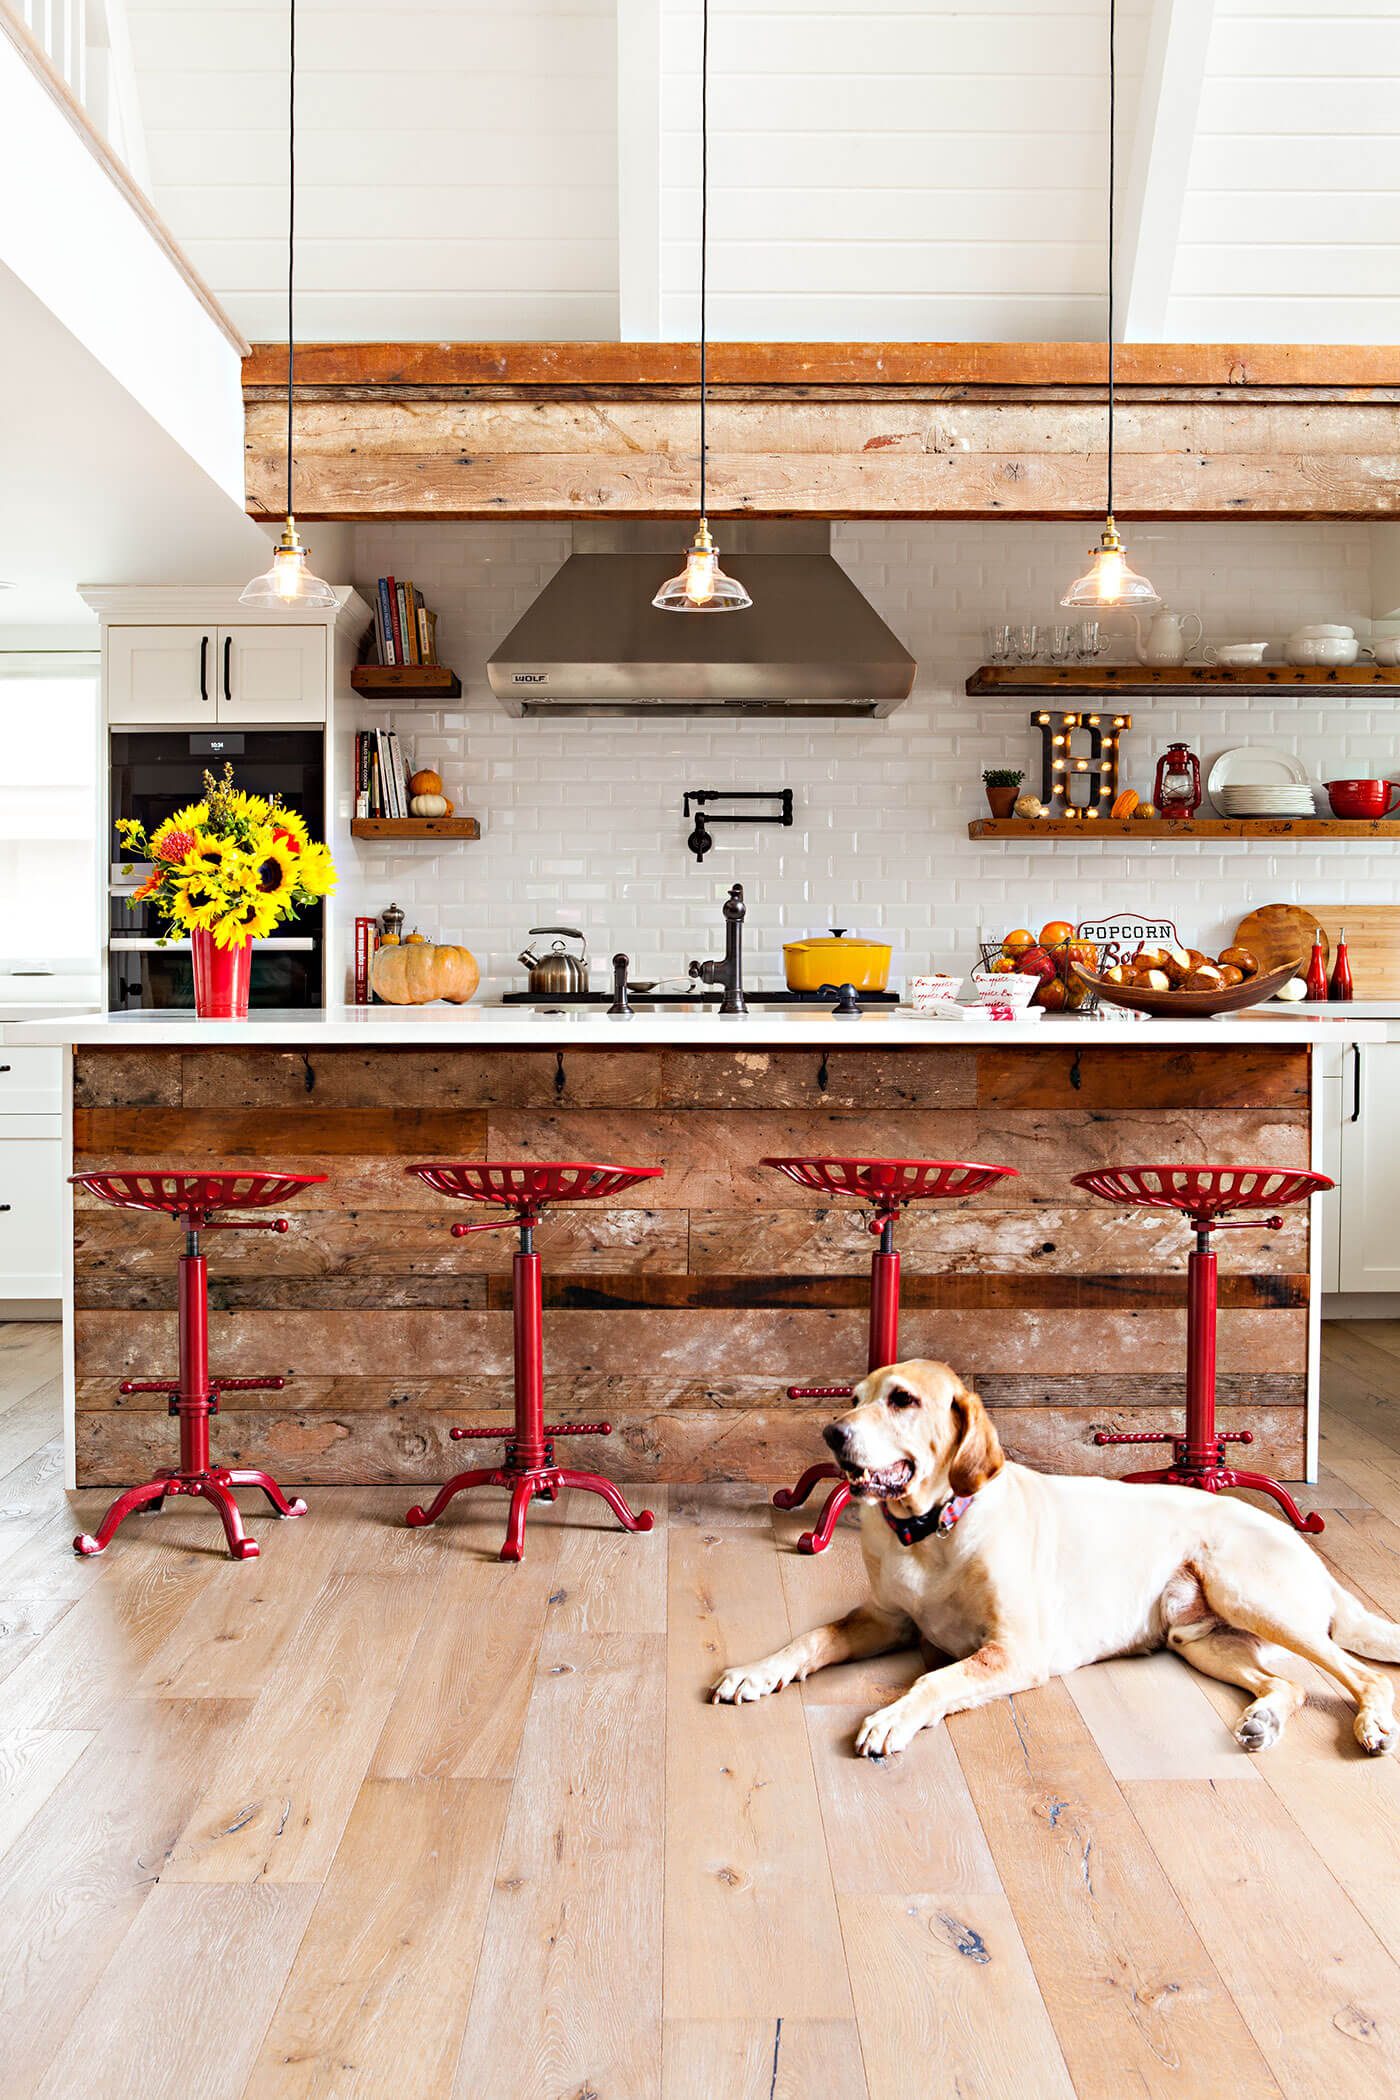 Rustic kitchen with metal accents and dog sitting in front